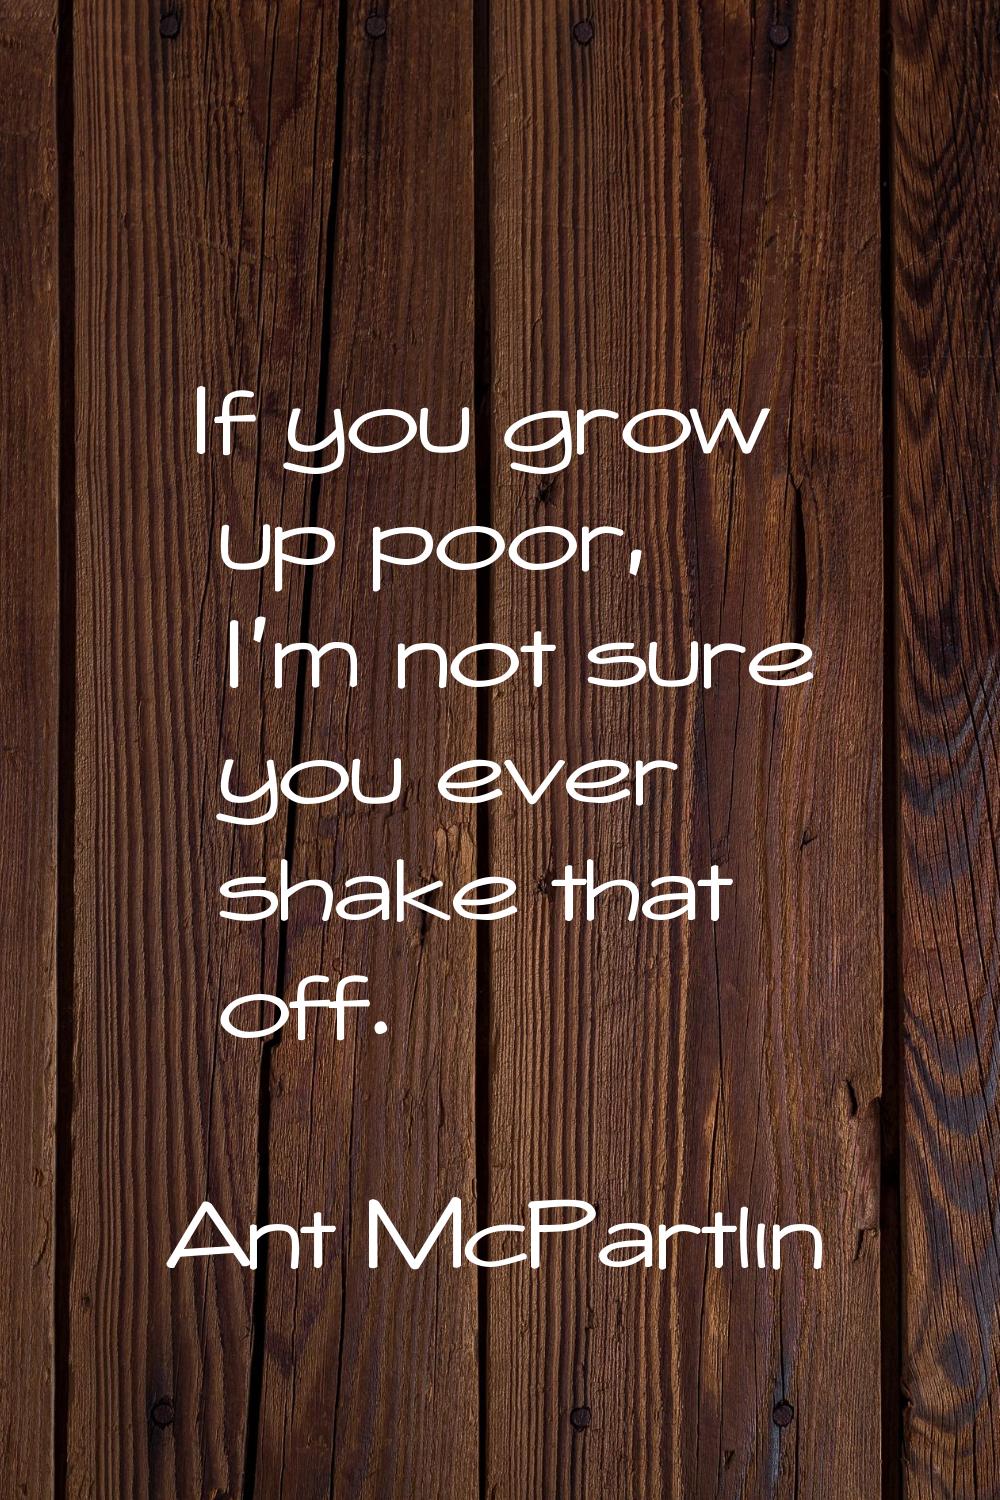 If you grow up poor, I'm not sure you ever shake that off.